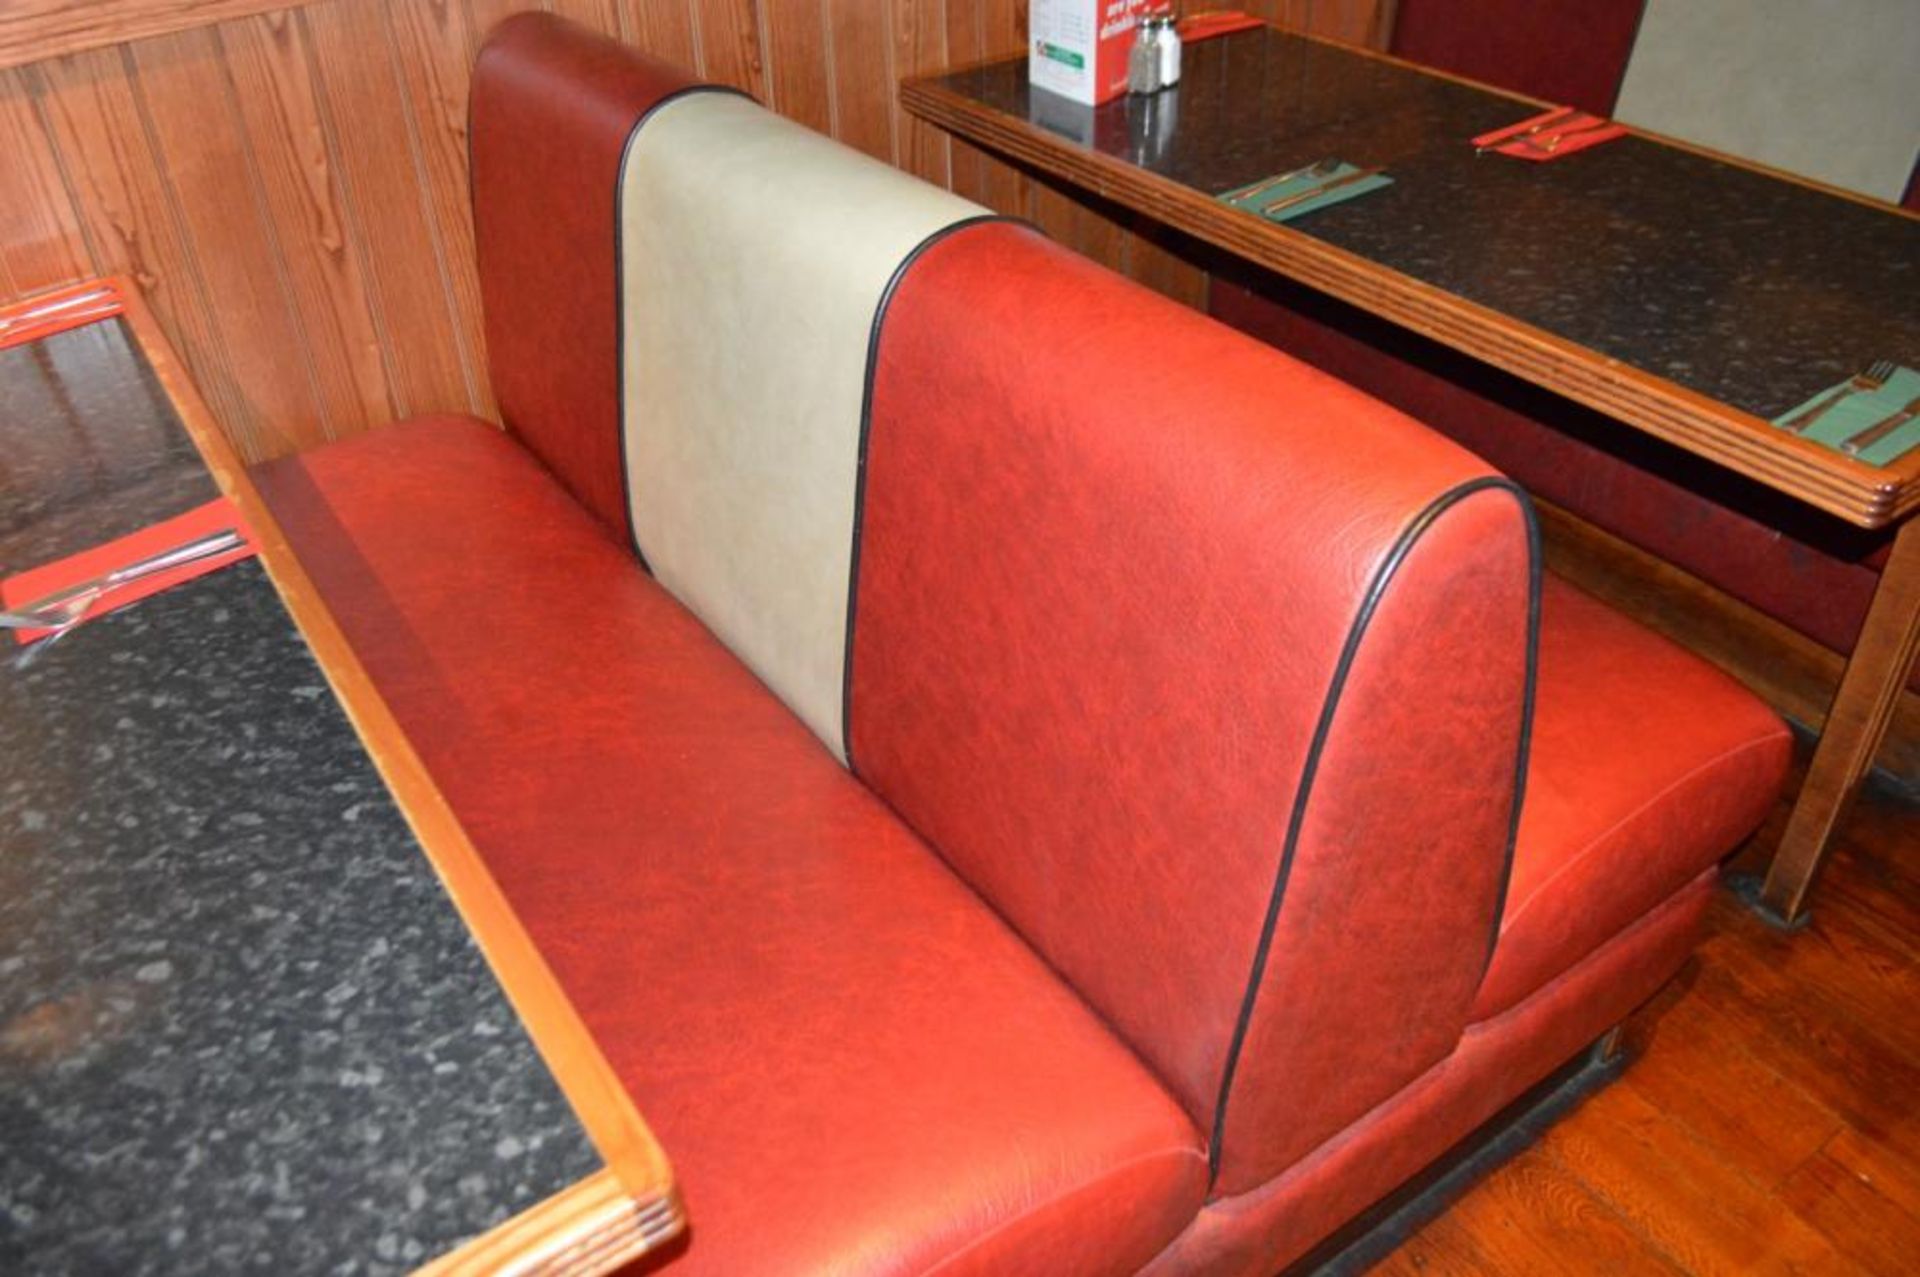 1 x Selection of Cosy Bespoke Seating Booths in a 1950's Retro American Diner Design With Dining Tab - Image 10 of 10